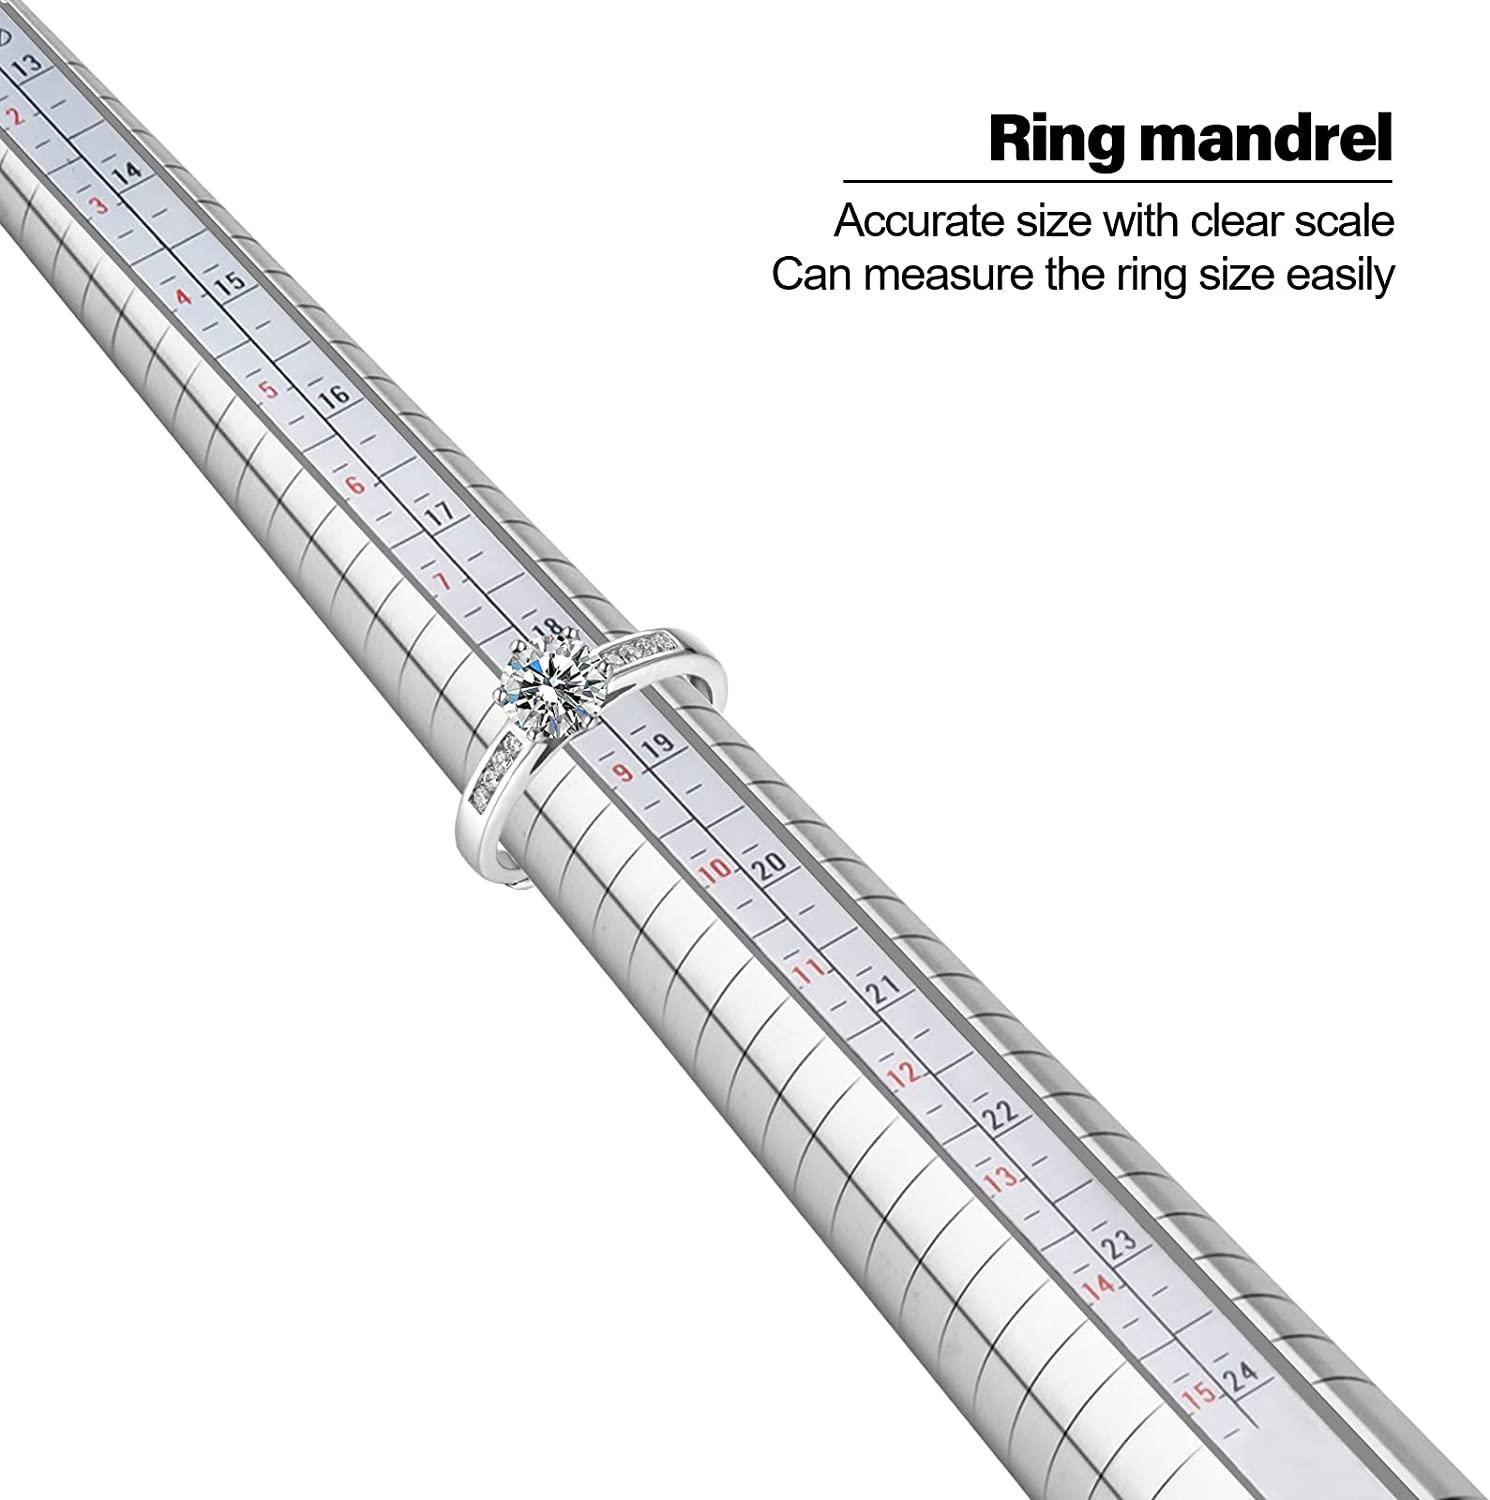 Ring mandrel with markings